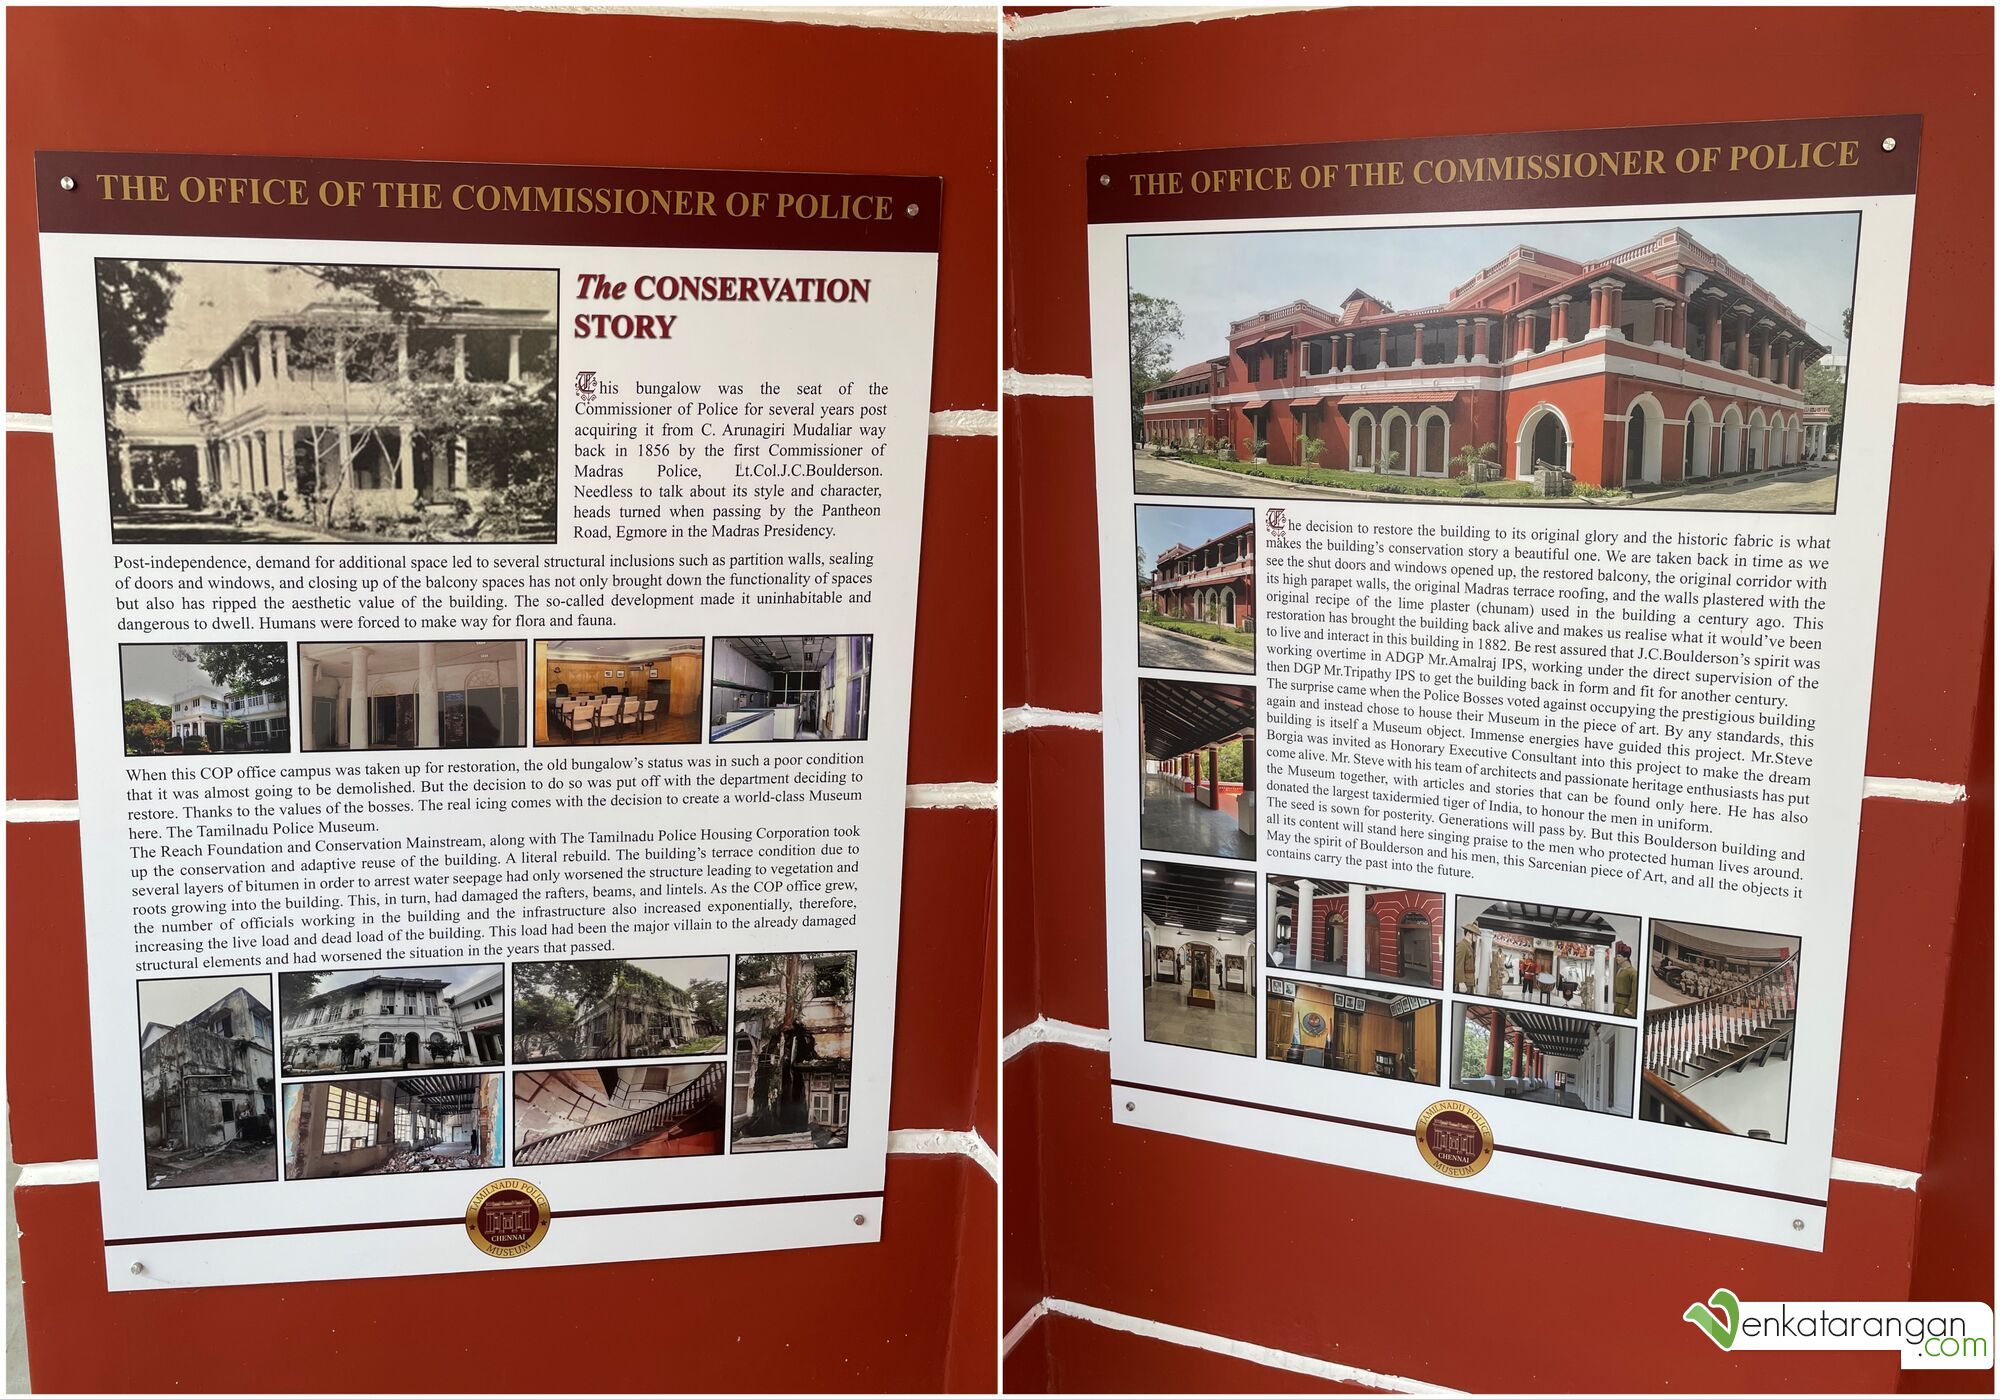 The conservation story of the bungalow built by C Arunagari Mudaliar in 1842